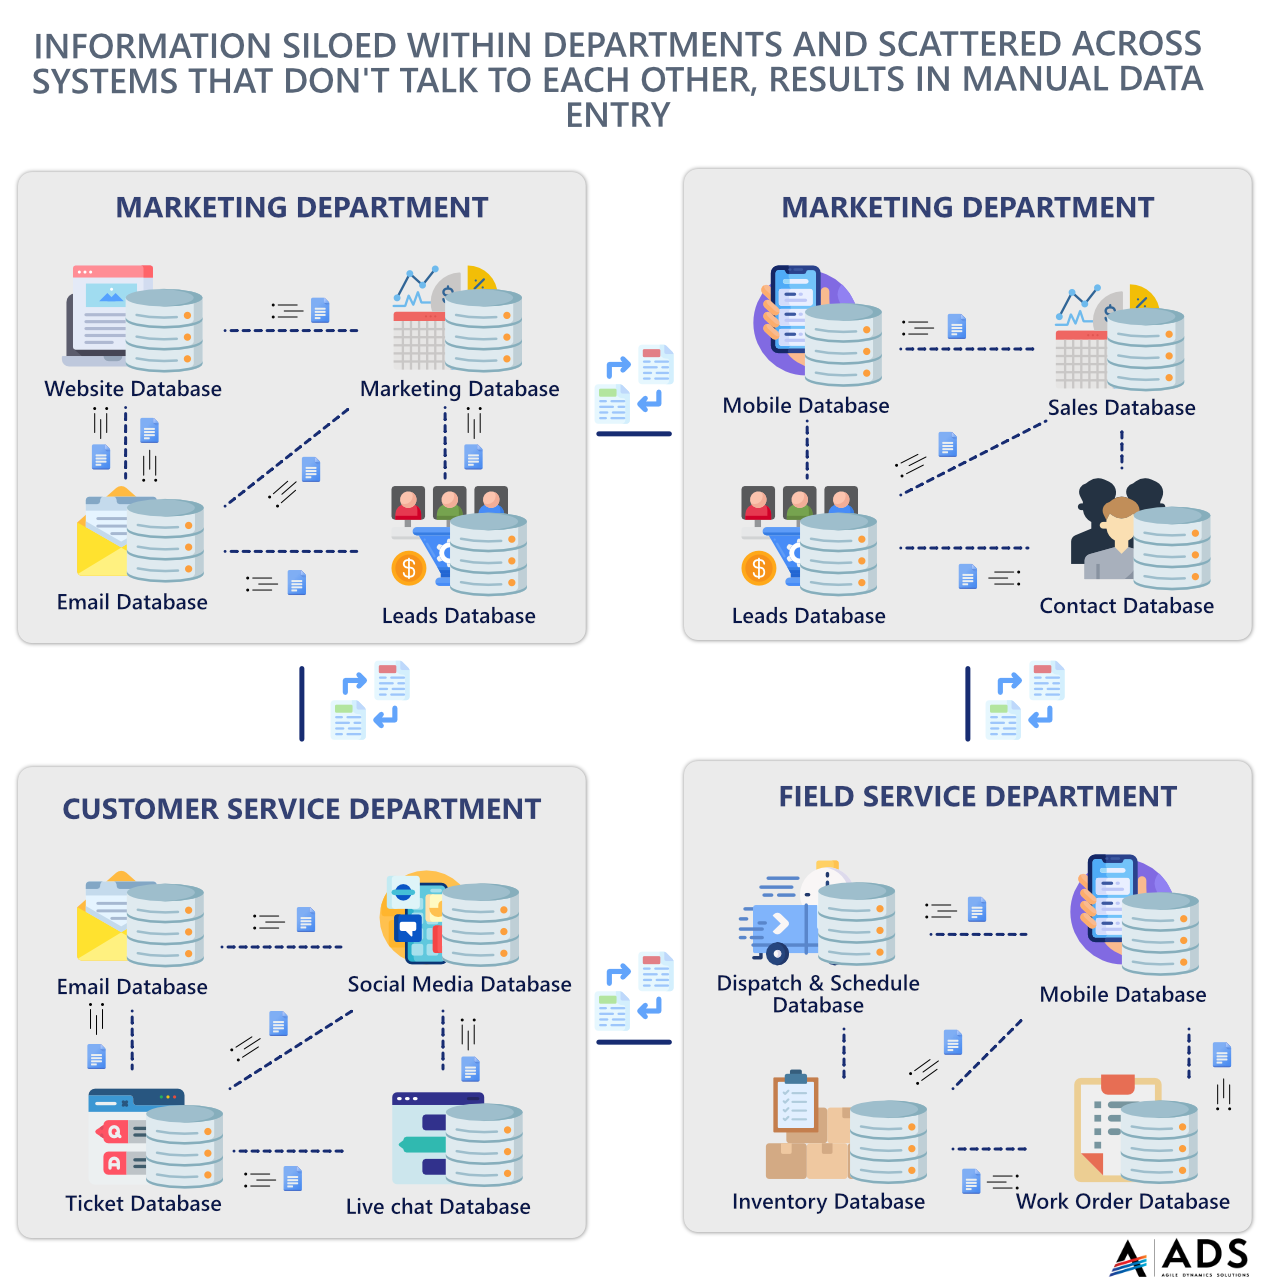 crm benefits without crm departments are disconnected